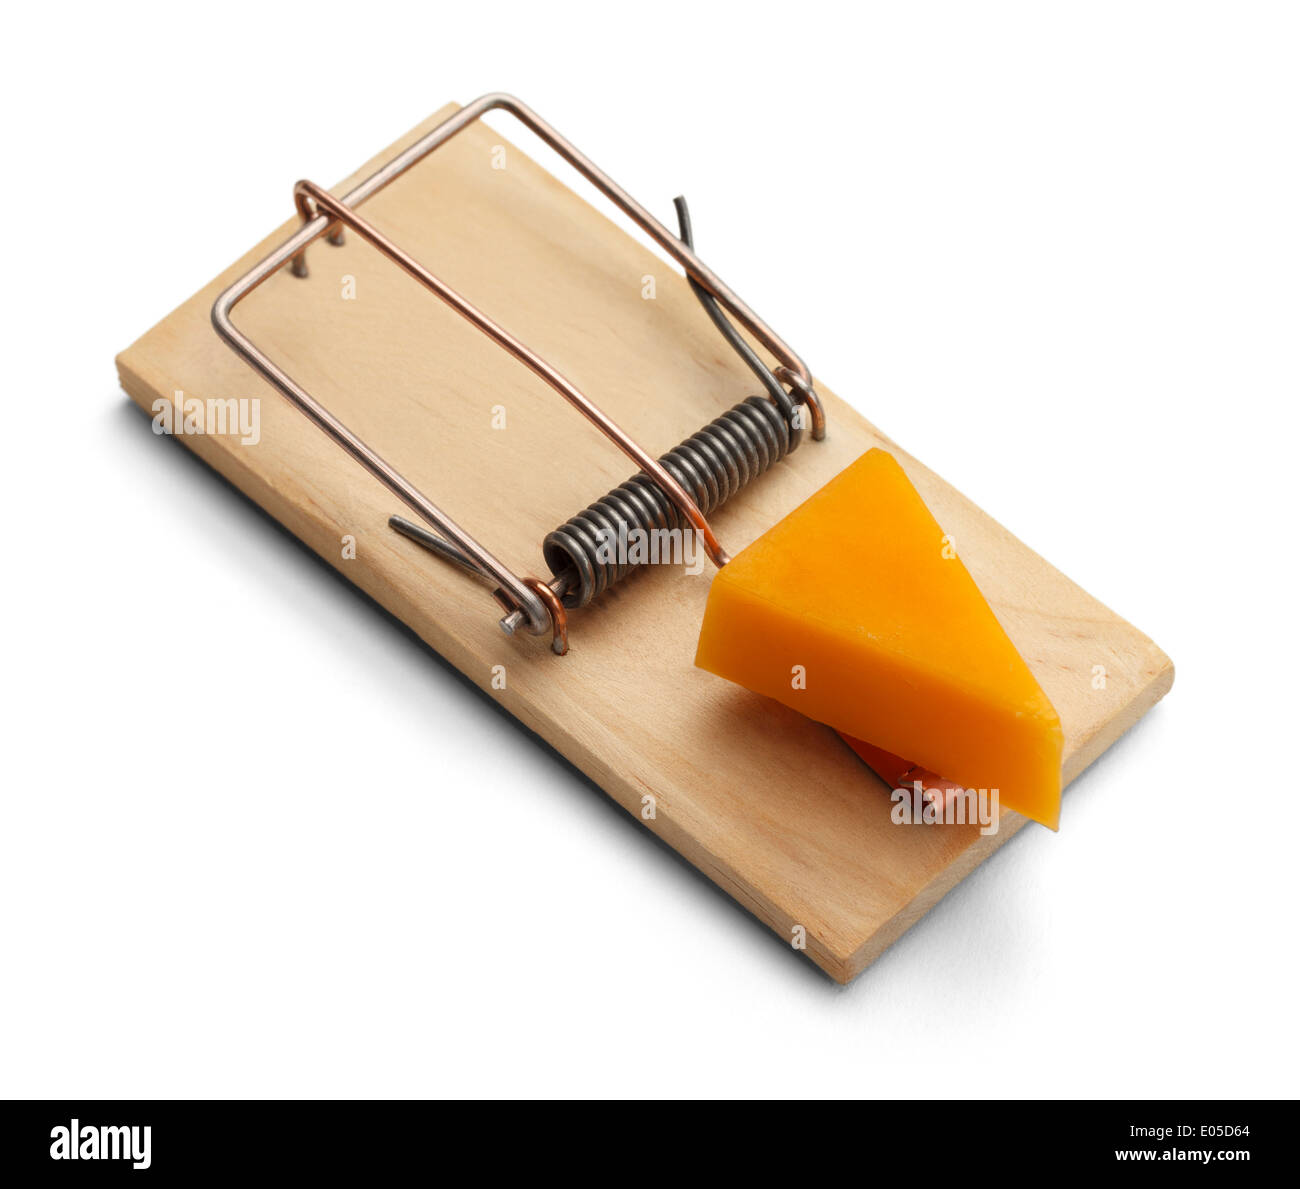 Mausefalle mit Cheddar-Käse, Isolated on White Background. Stockfoto